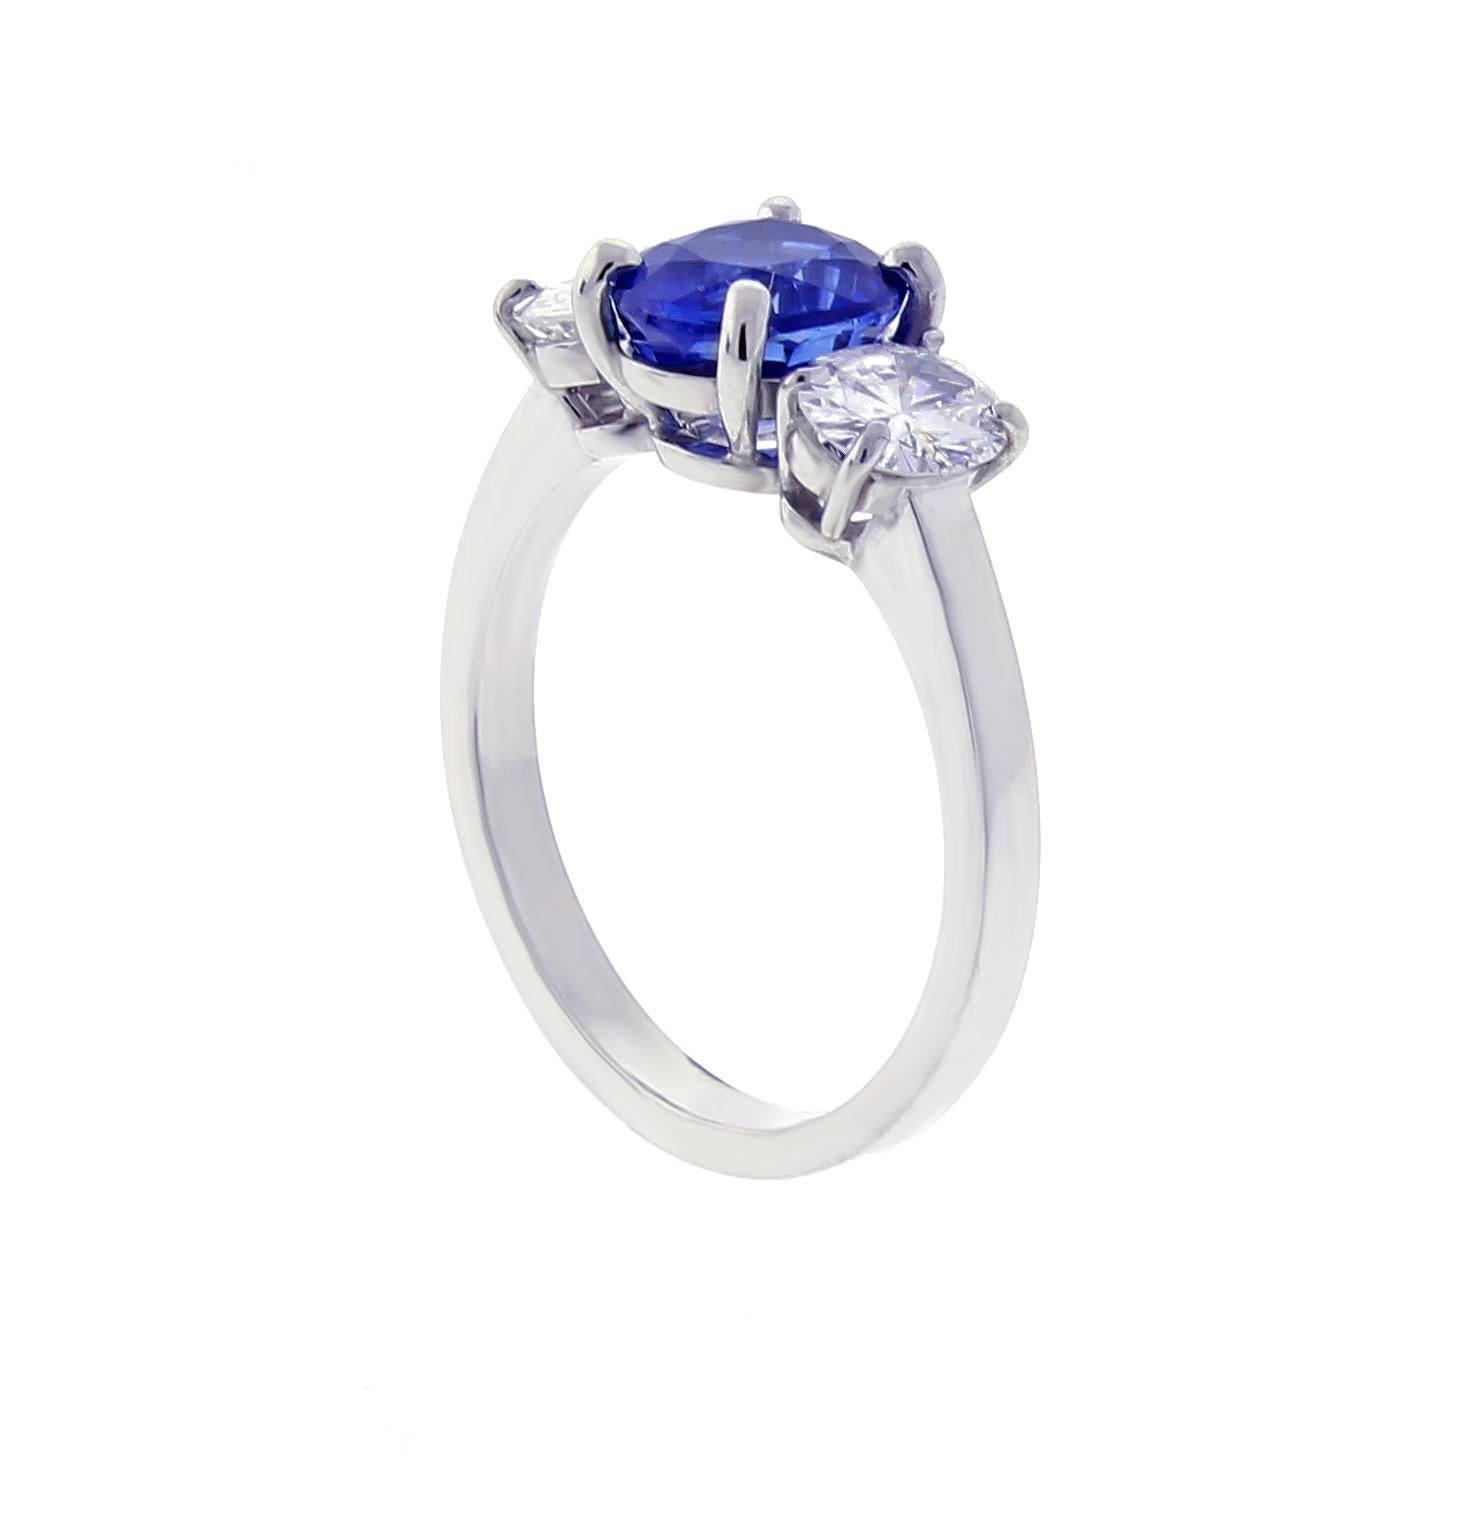 From the master ring makers of Pampillonia jewelers an oval sapphire and diamond handmade ring.
♦ Designer: Pampillonia
♦ Metal: Platinum  
♦ Sapphire=1.95 Ceylon, presumed heated
♦ 2 oval diamonds=.77 E-F VS
♦ Circa 2020
♦ Size 6, Resizable
♦